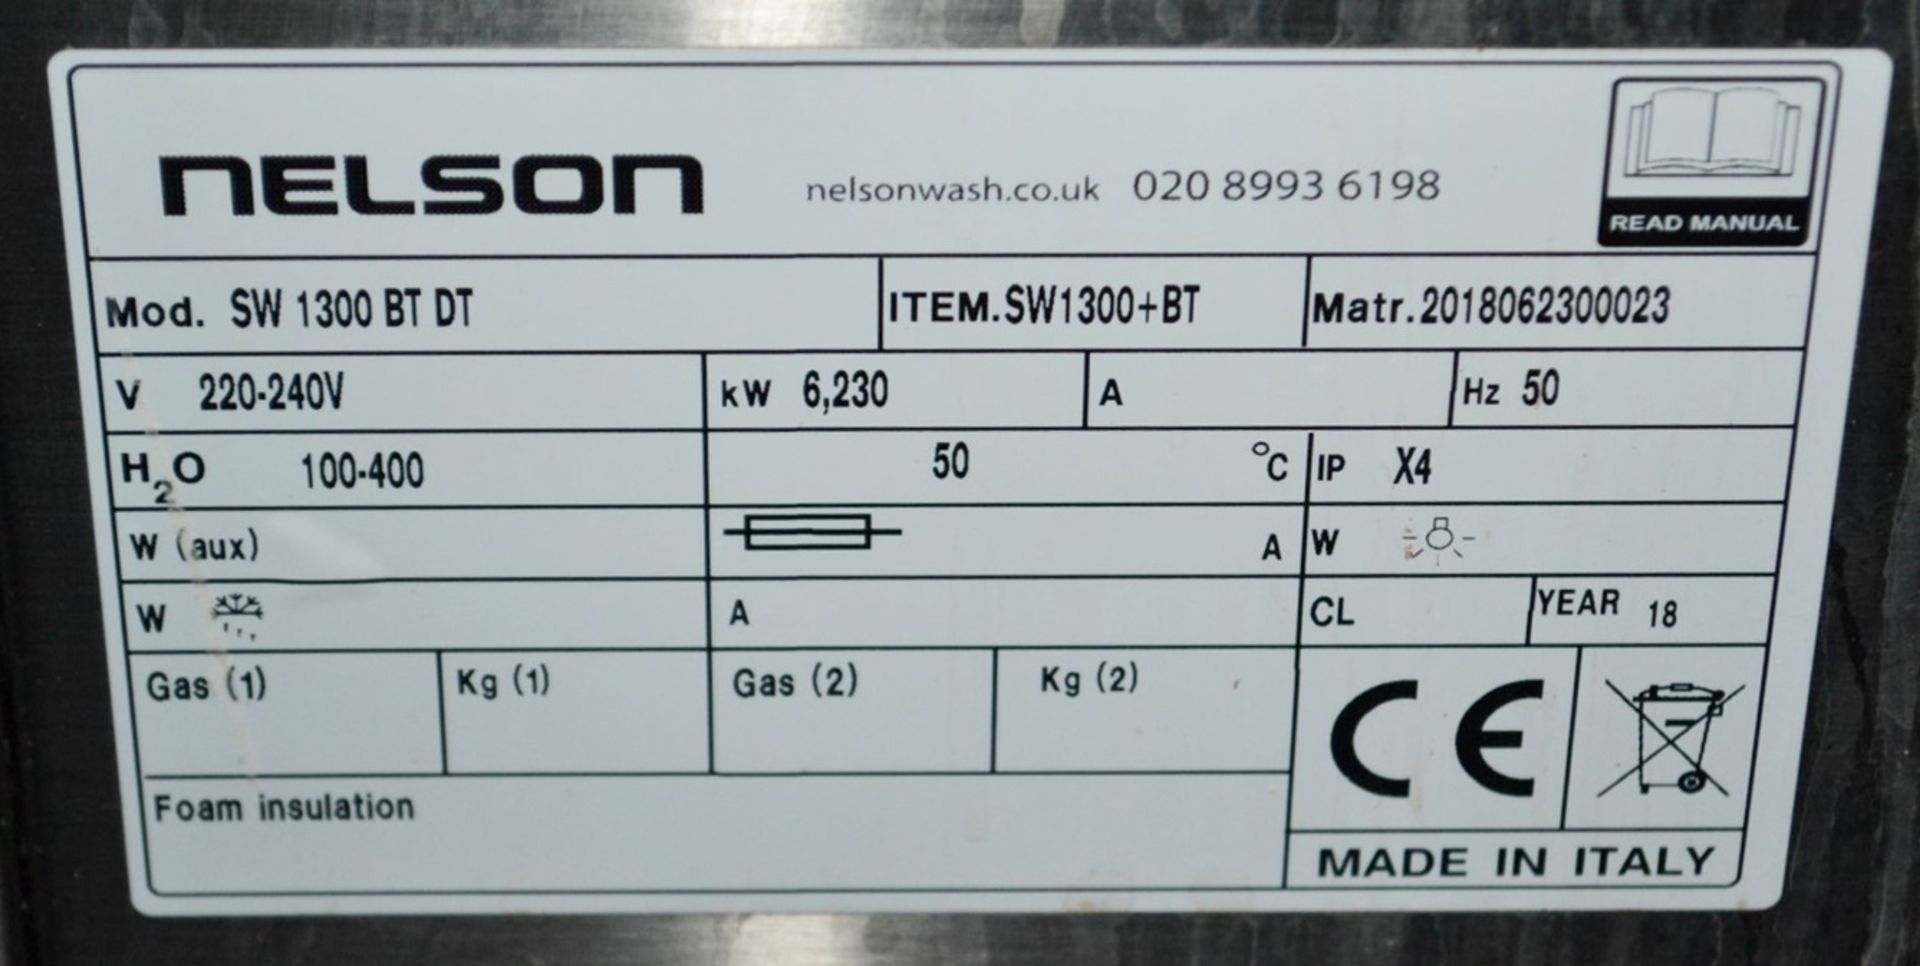 1 x NELSON Commercial Pass Through Dishwasher - Model SW1300 - CL350 - Ref215 - Location: Altrincham - Image 4 of 7